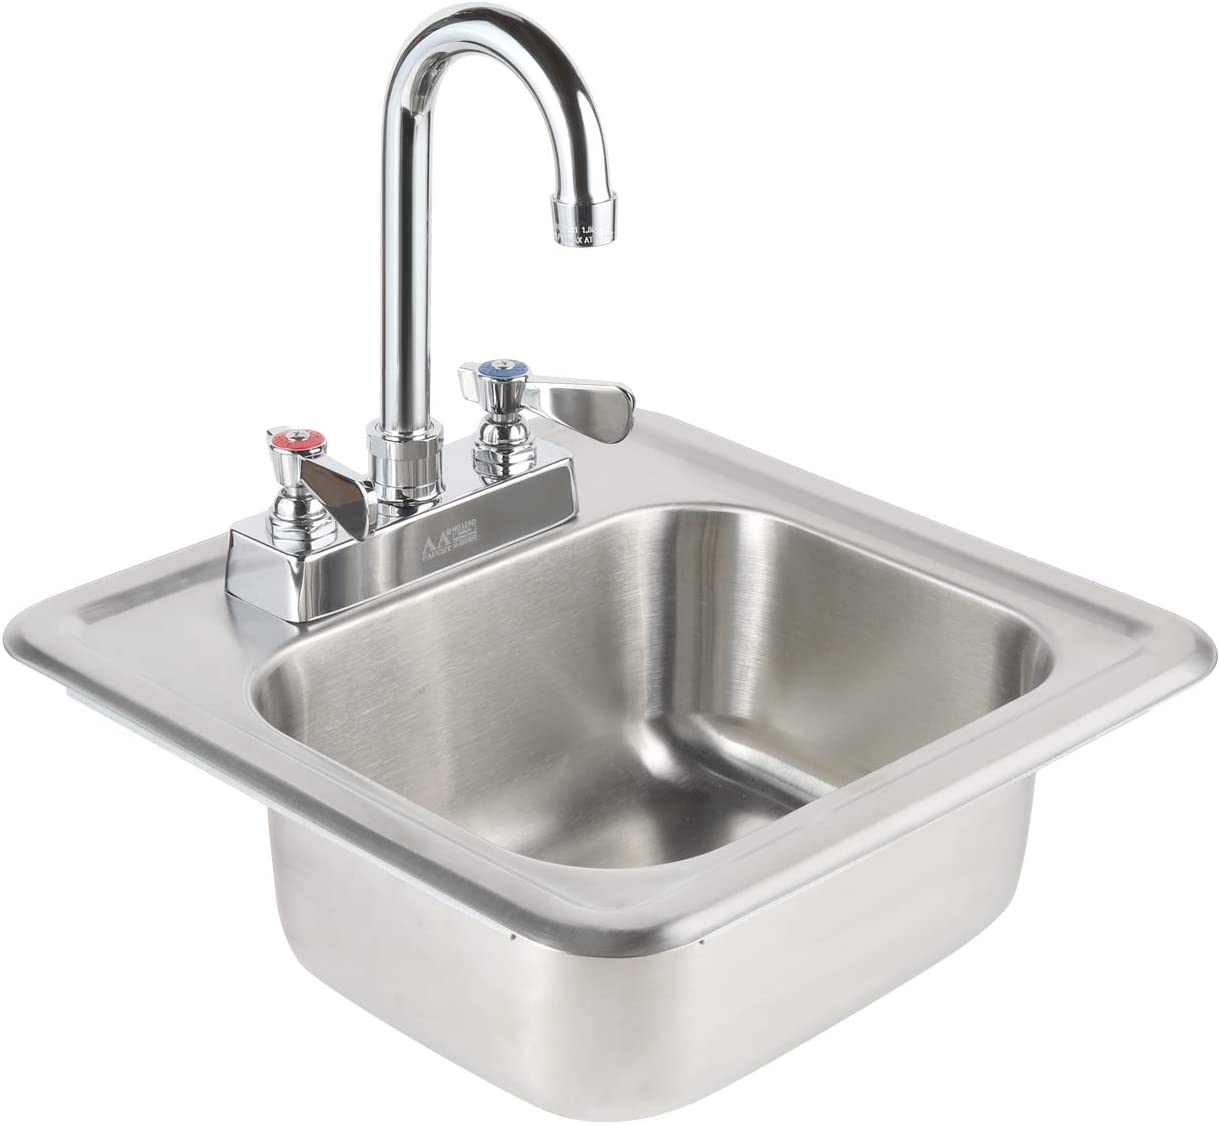 Mini 13" x 13" Drop-in Hand Sink with Lead Free 3-1/2” Spout Faucet & Strainer, ETL Certified, HS-0810IG